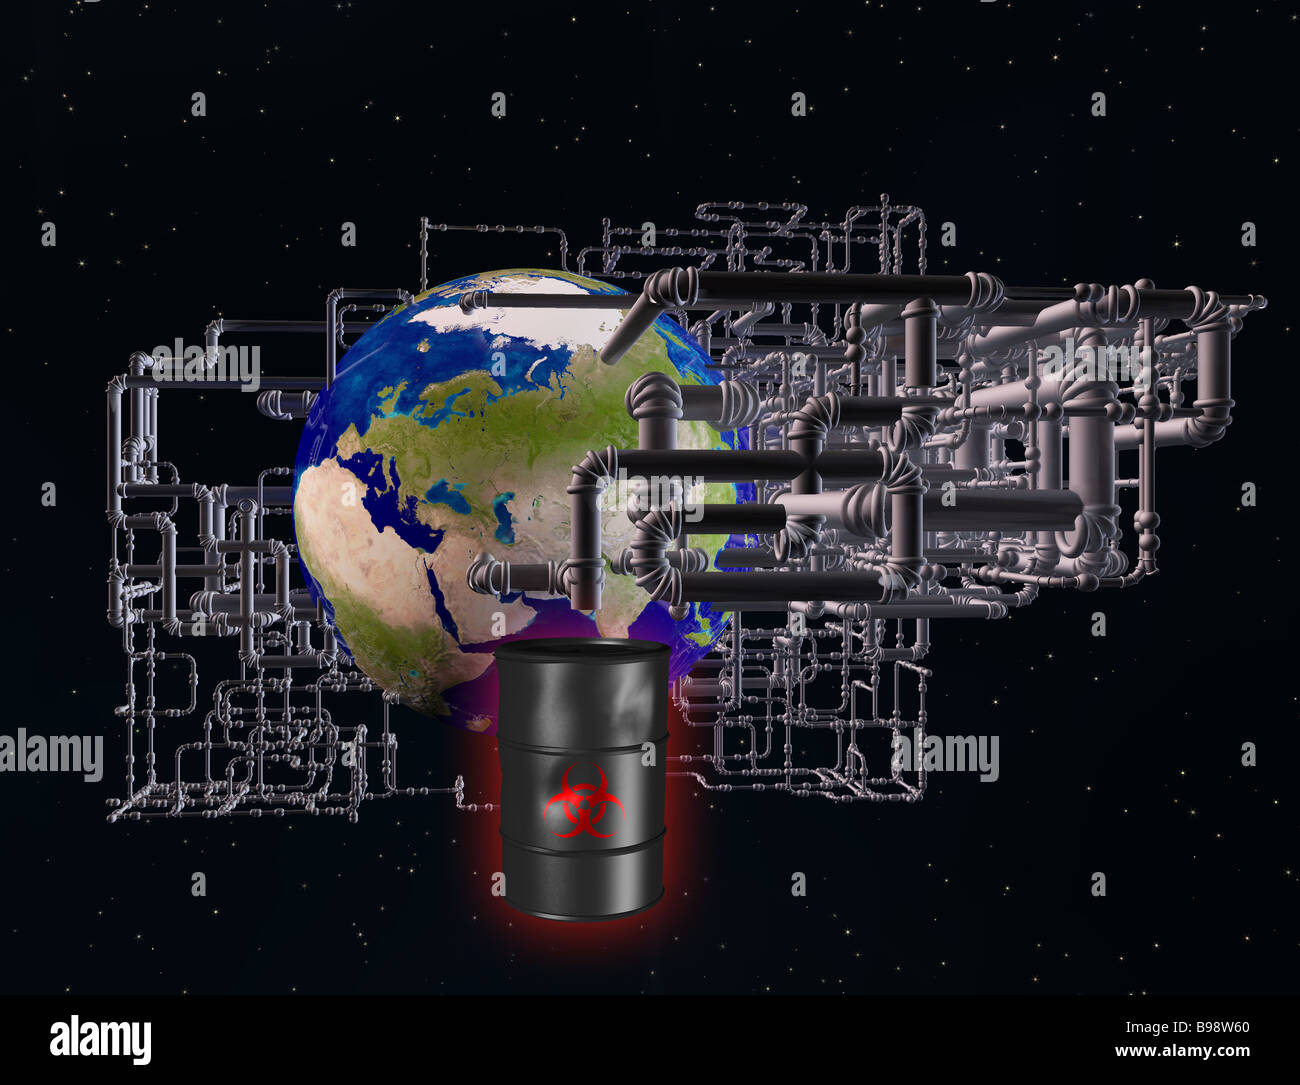 computer graphic image of the planet earth surrounded by a network of pipes suggesting toxic waste or oil refineries Stock Photo